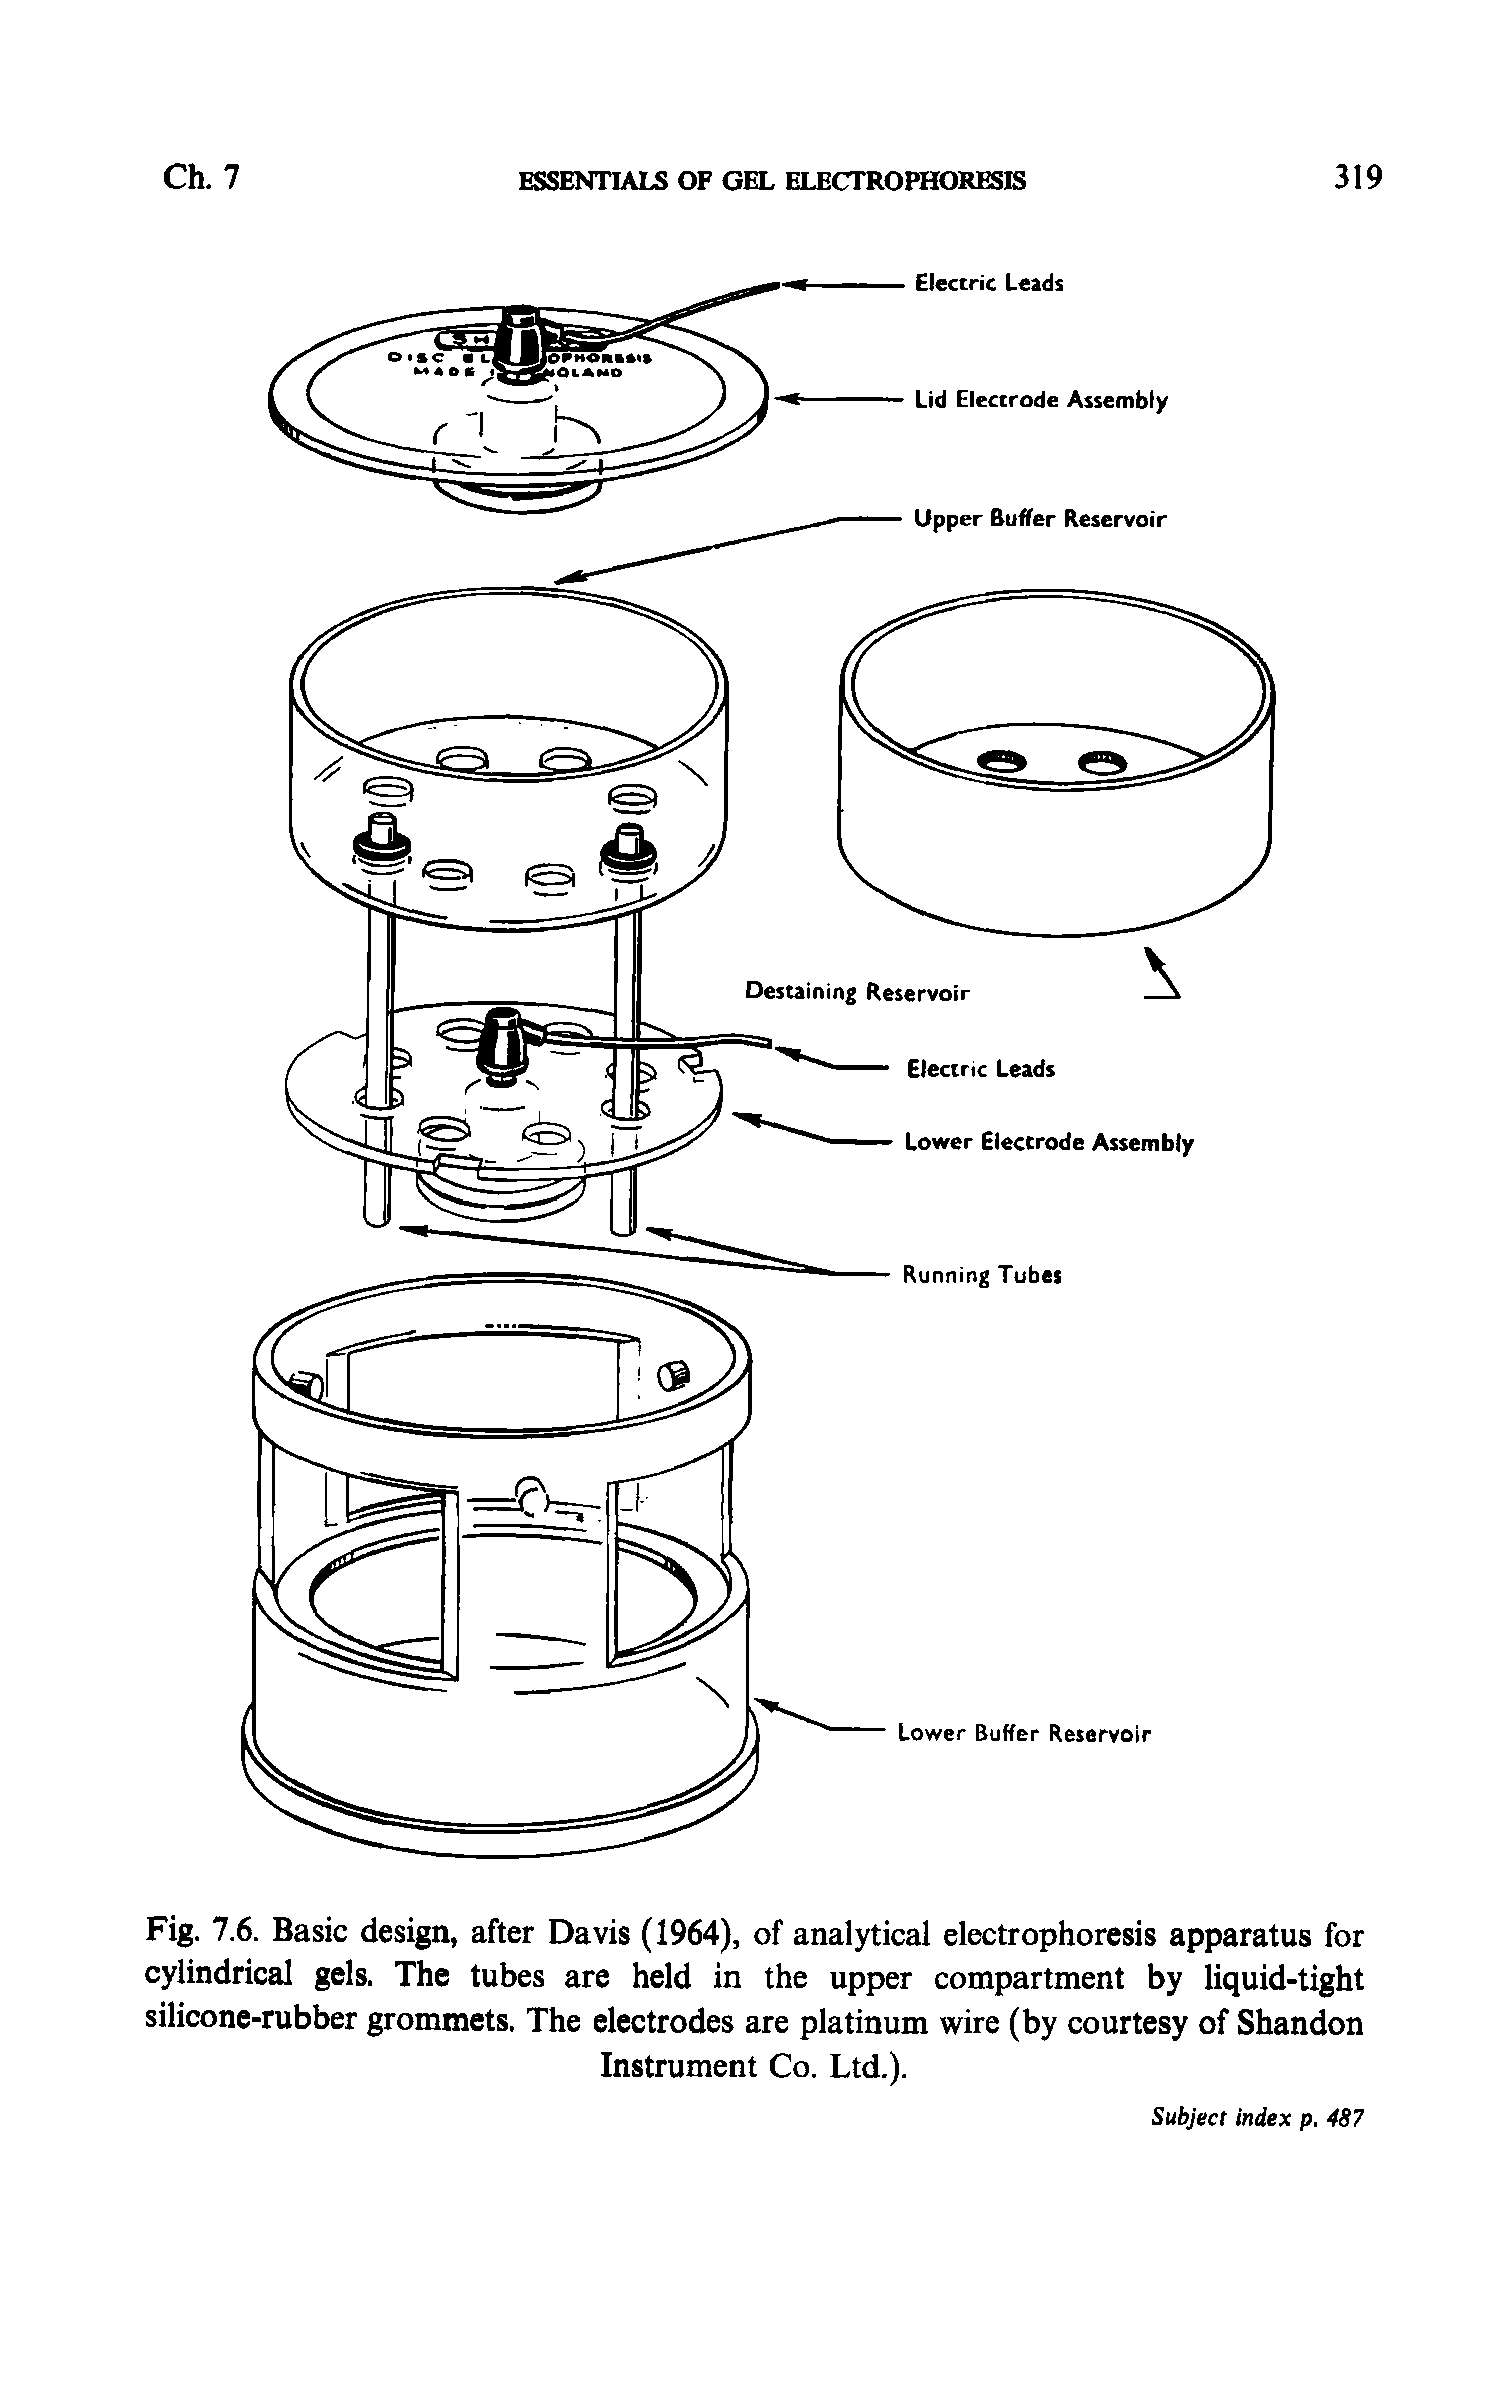 Fig. 7.6. Basic design, after Davis (1964), of analytical electrophoresis apparatus for cylindrical gels. The tubes are held in the upper compartment by liquid-tight silicone-rubber grommets. The electrodes are platinum wire (by courtesy of Shandon...